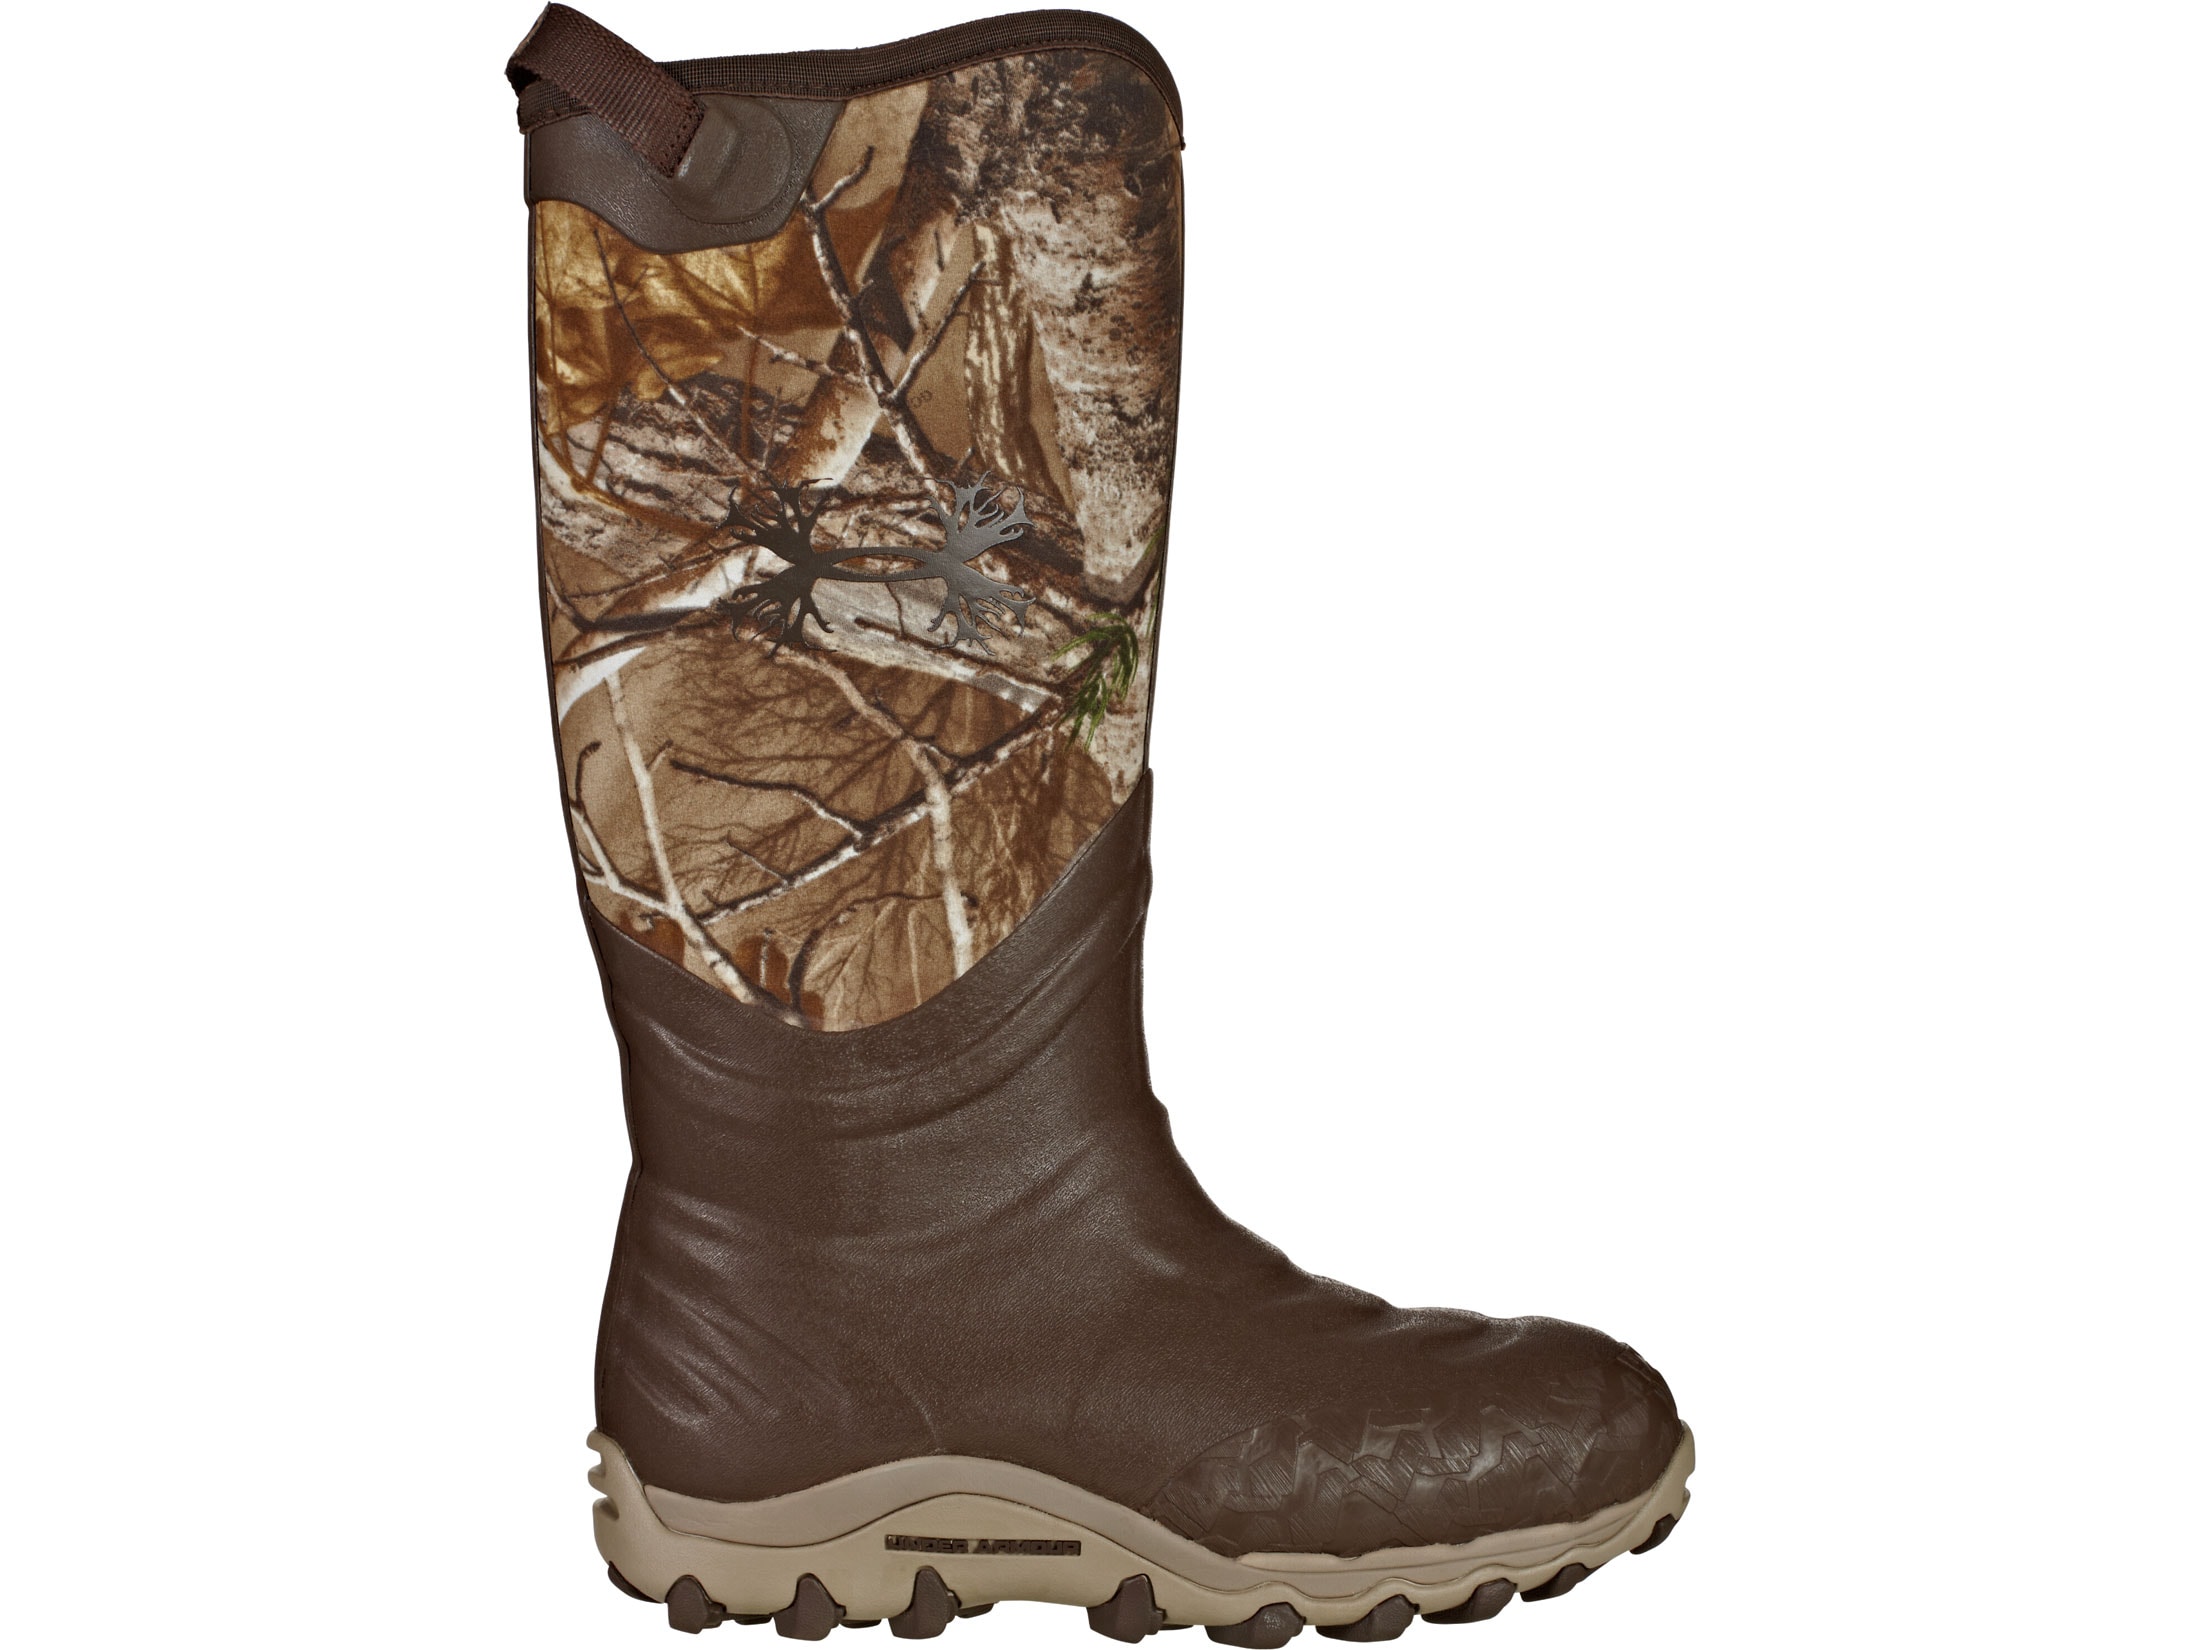 800 Gram Insulated Hunting Boots Rubber